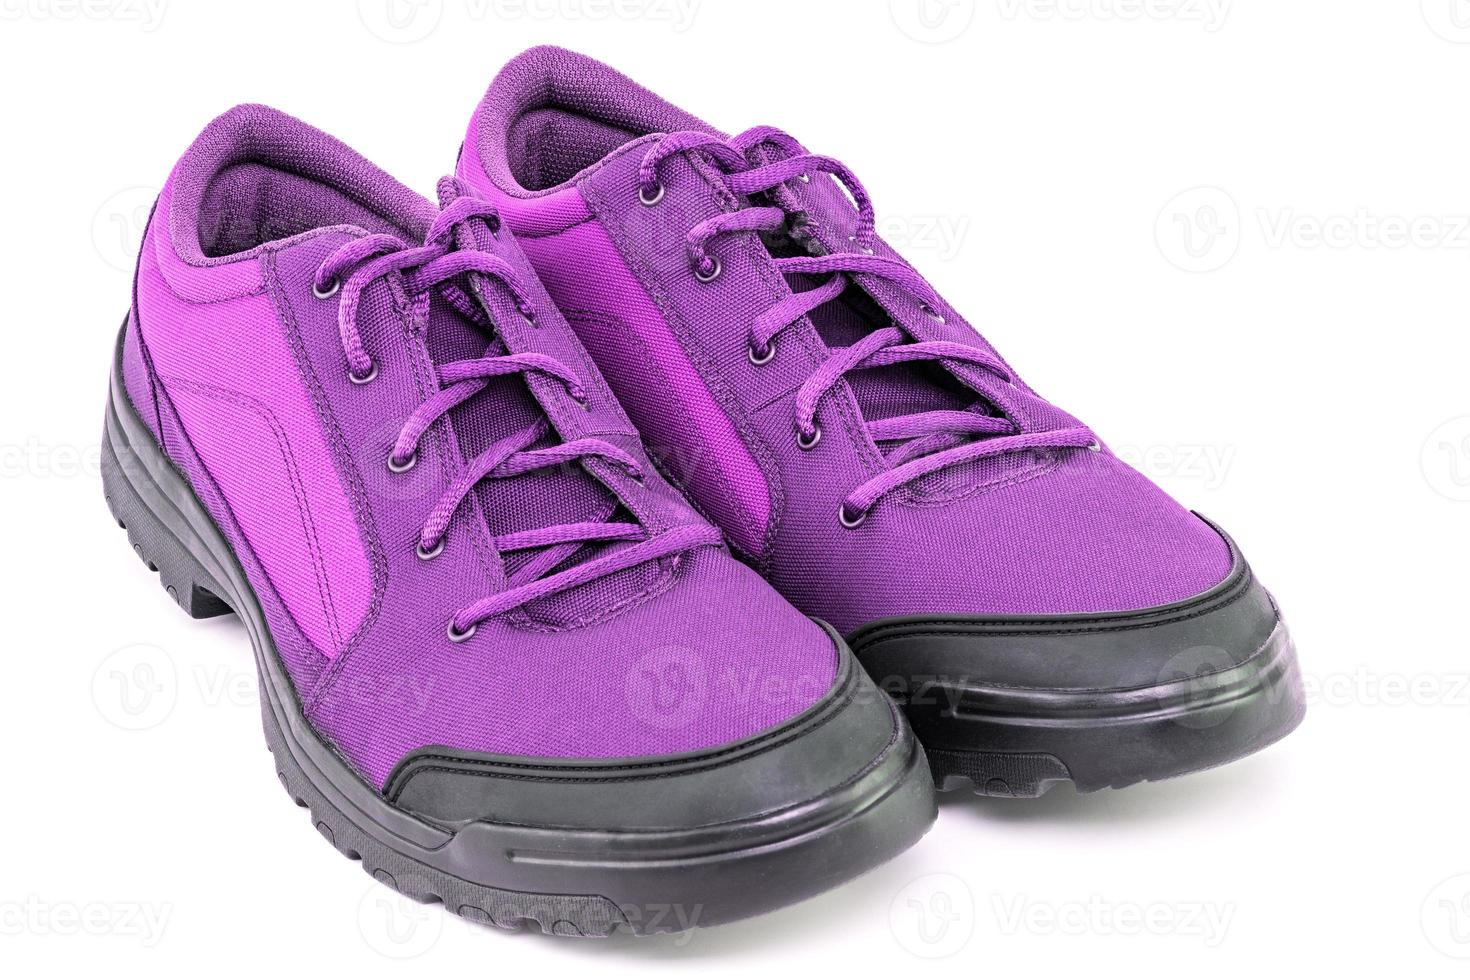 a pair of simple cheap purple hiking shoes isolated on white background - perspective close-up view photo